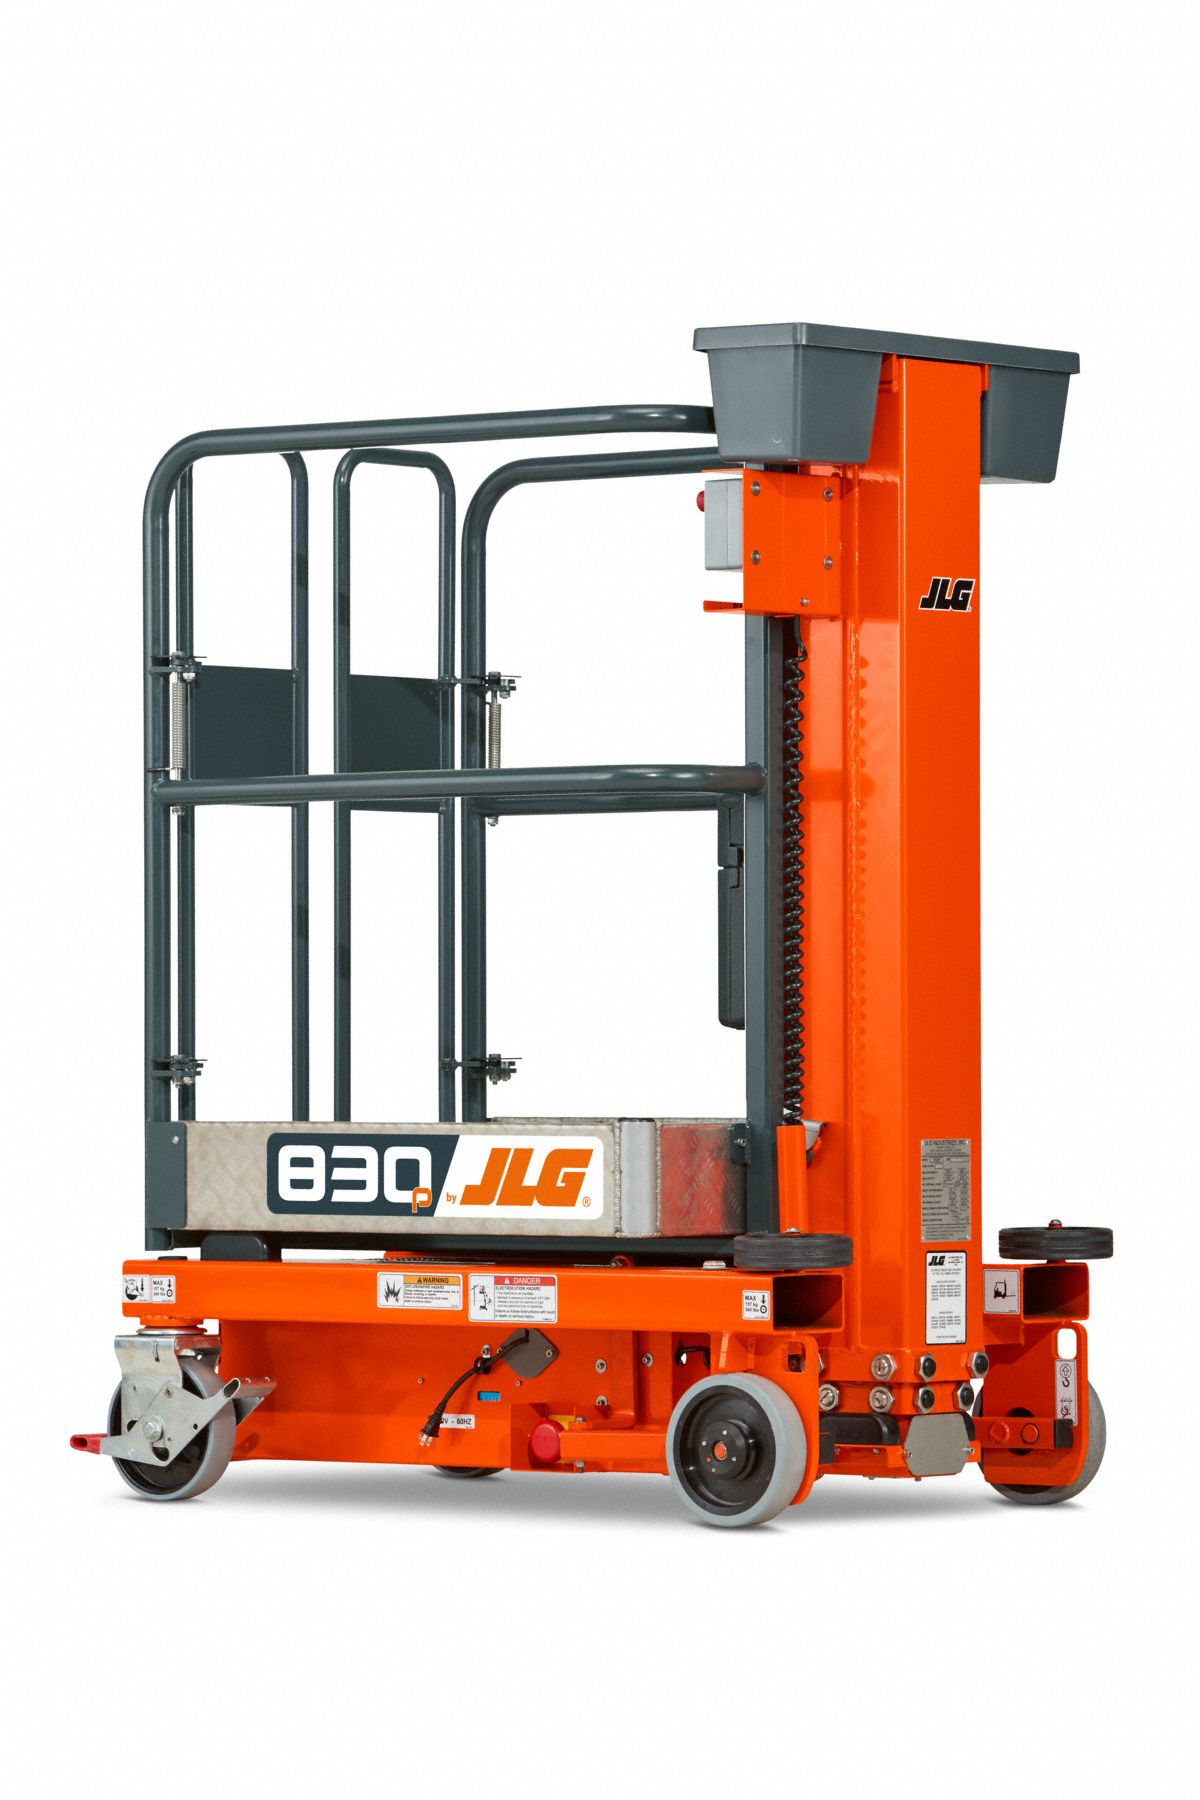 Personnel Lift: Battery, 440 lb Load Capacity, 5 ft Closed Ht, 14 ft Max. Work Ht